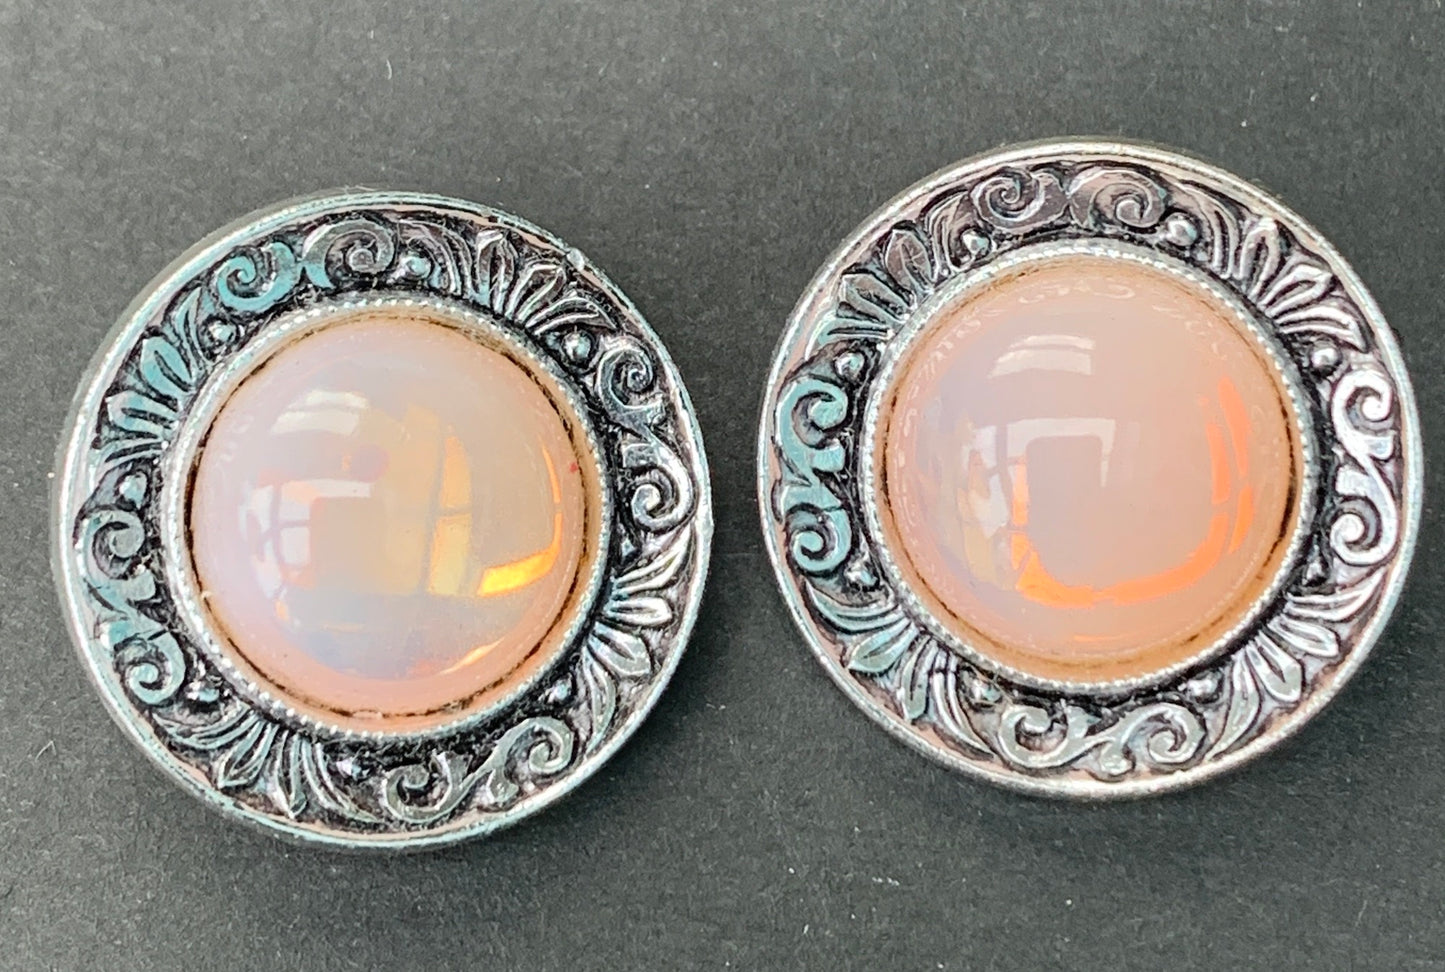 Charming Vintage Clip On Glowing Lucite Earrings